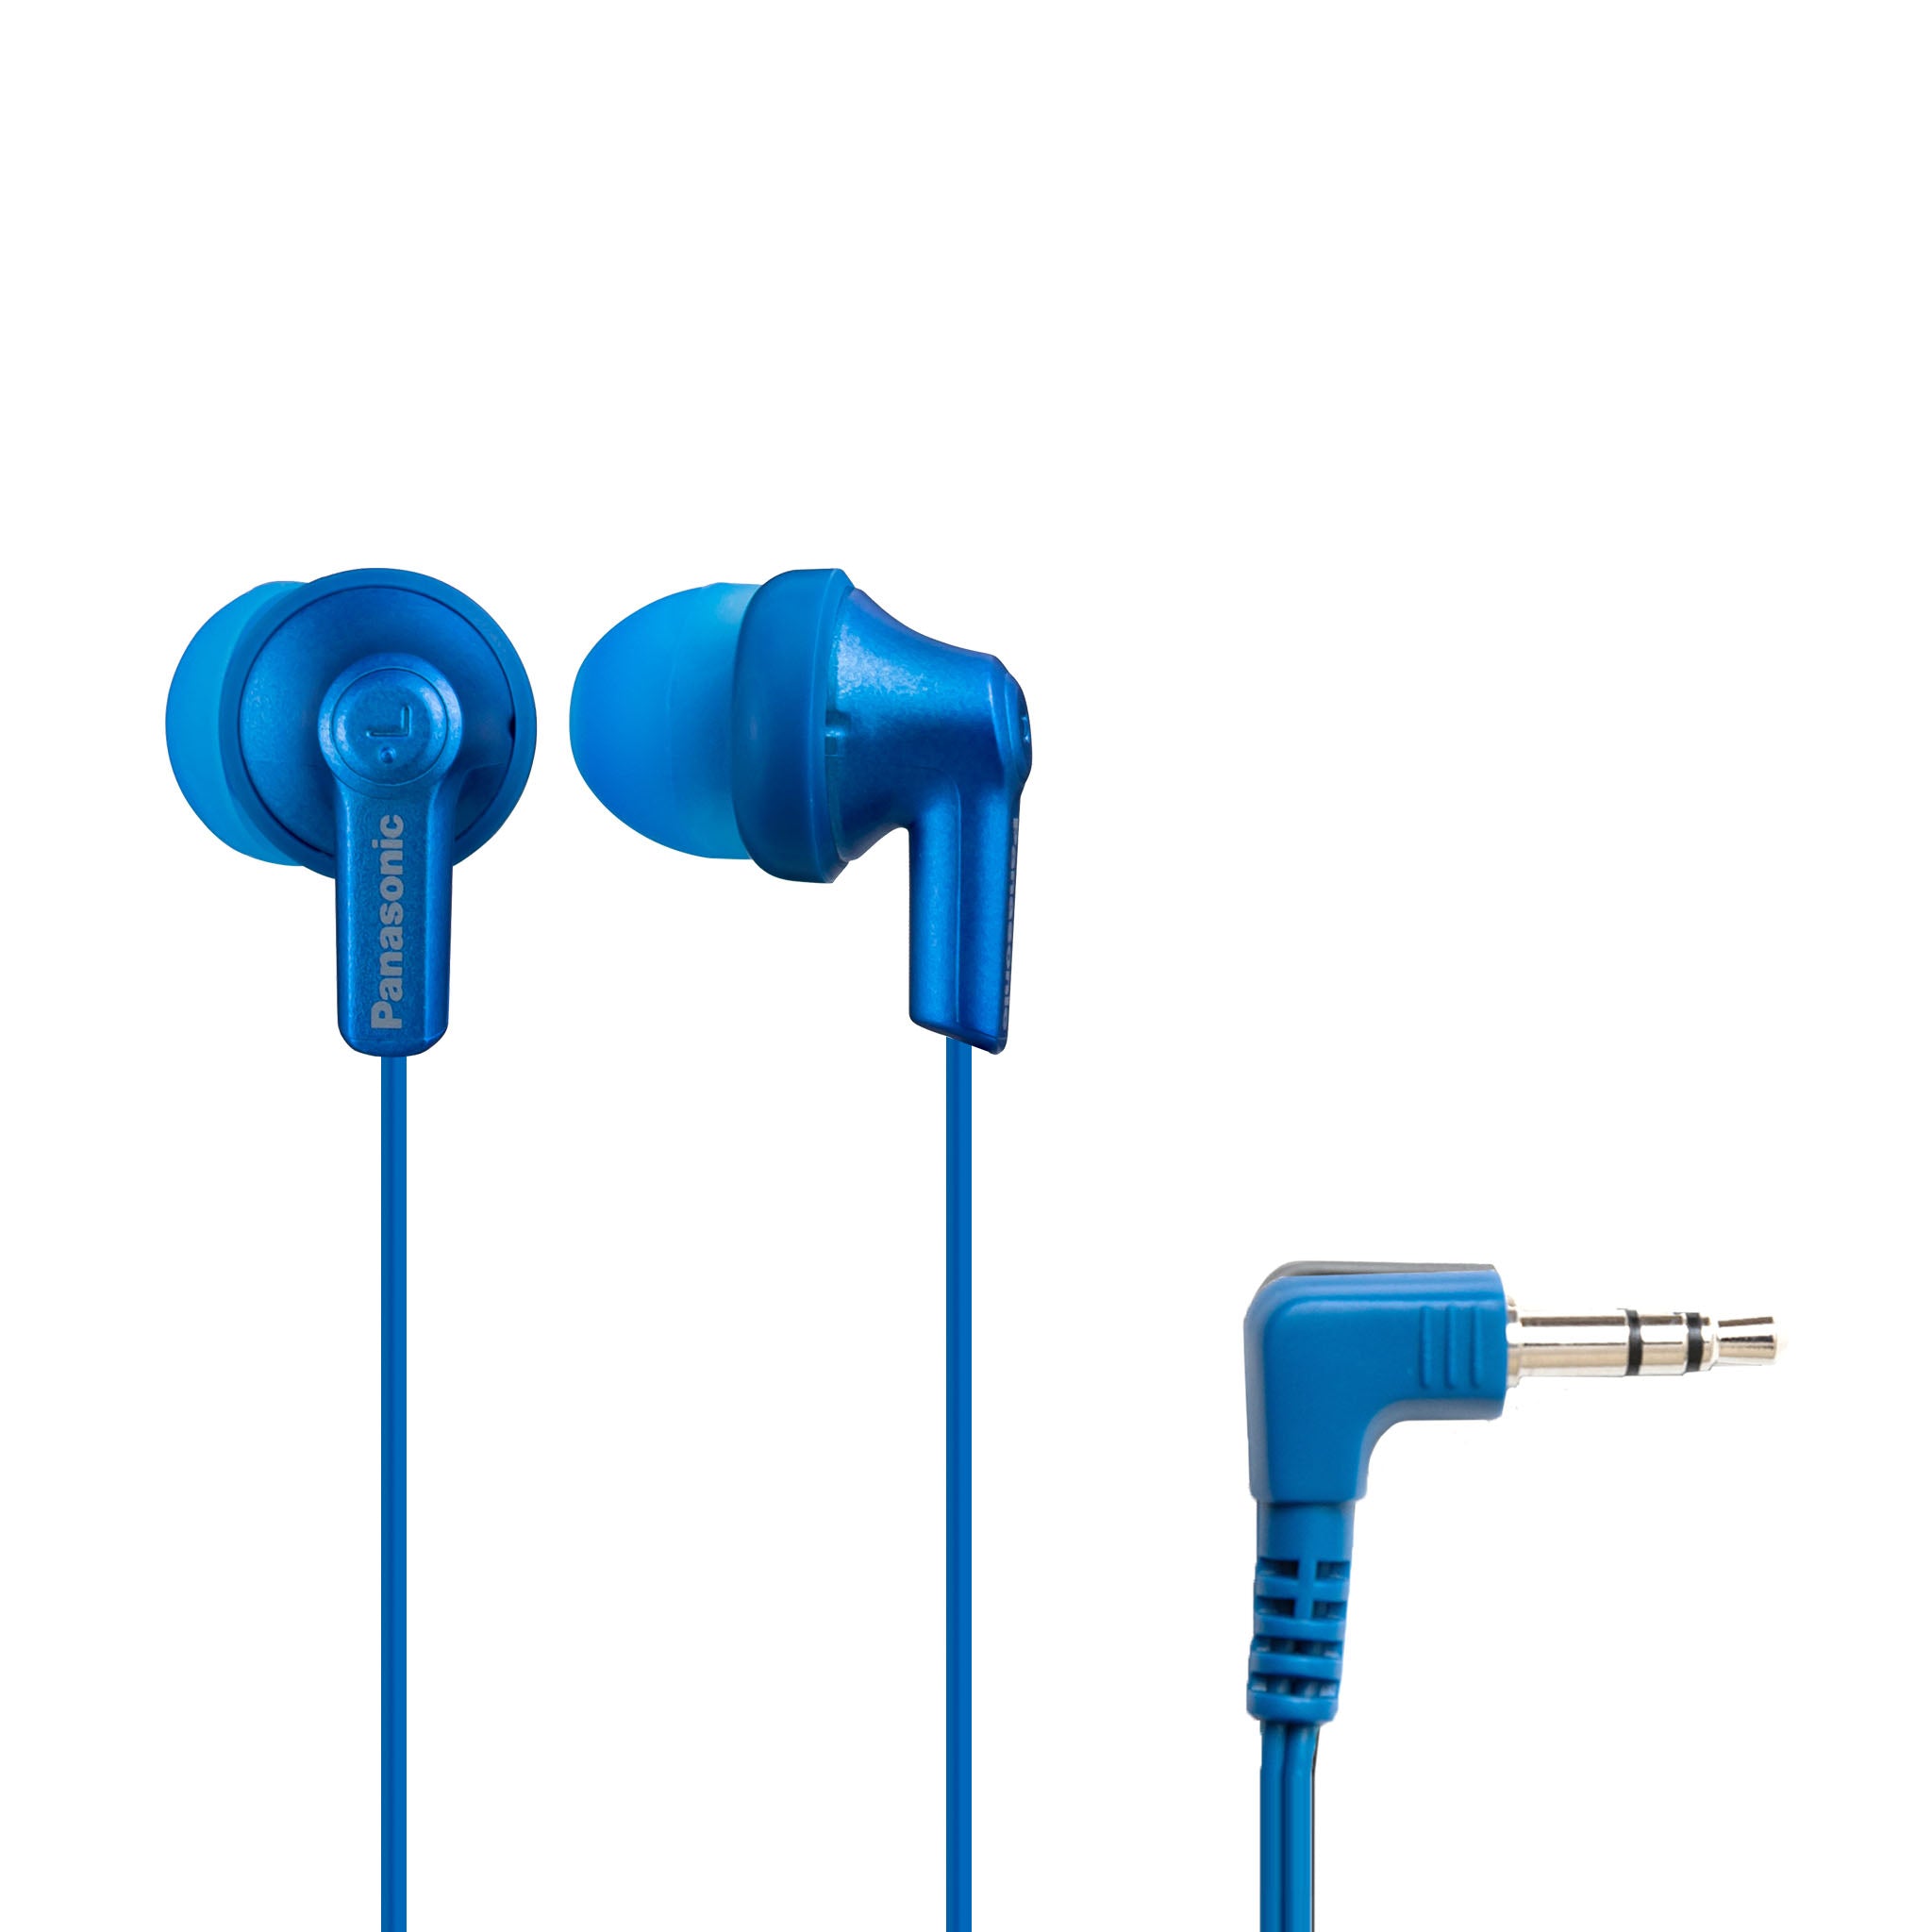 Panasonic ErgoFit In-Ear Earbud Headphones with 3.5mm Jack for Phones and  Laptops - RP-HJE120